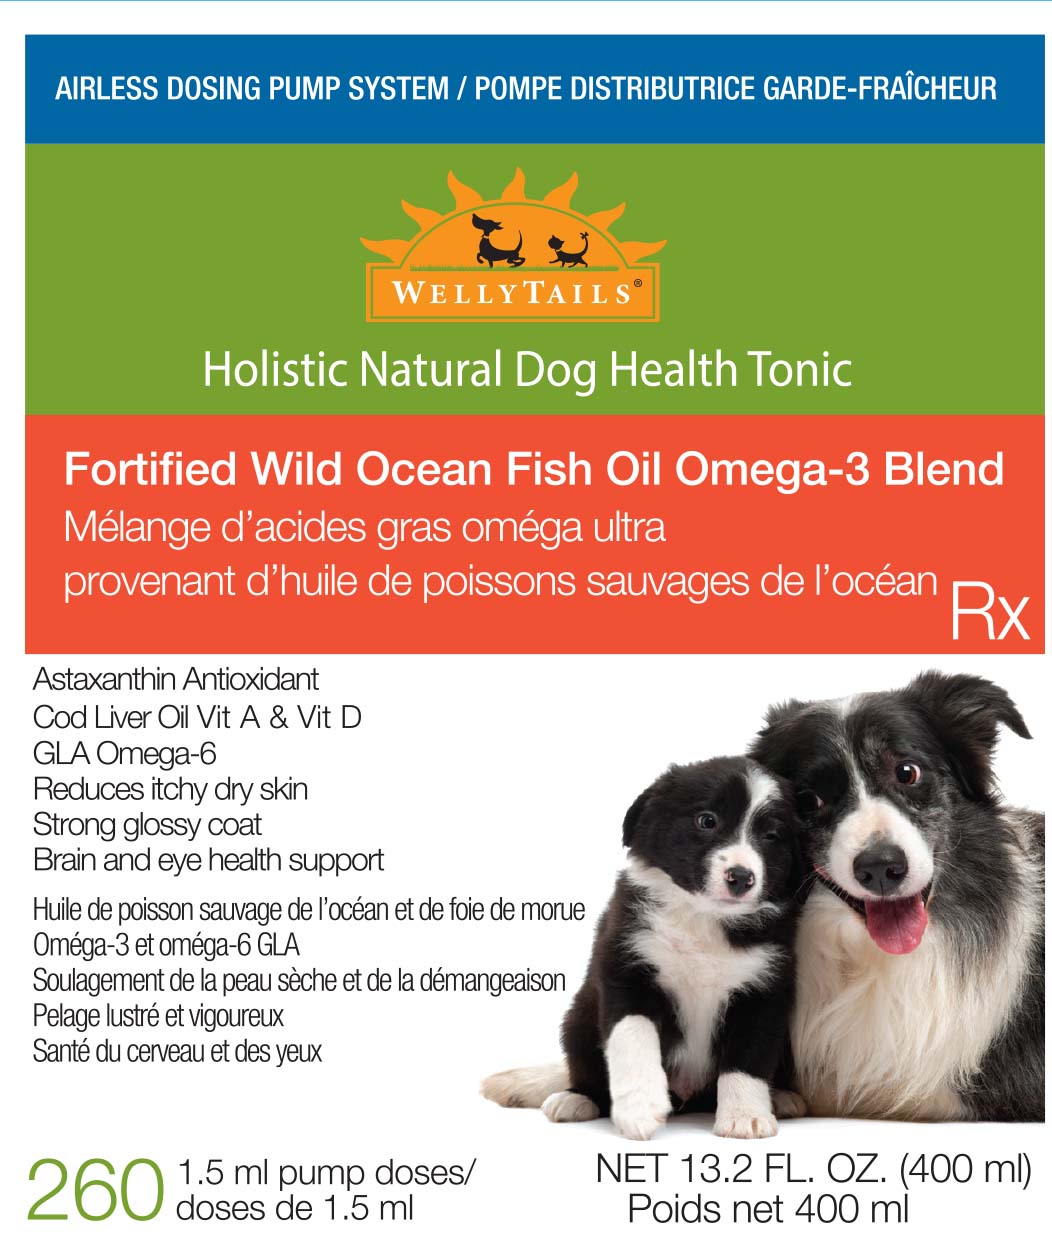 WellyTails Fortified Wild Ocean Fish Oil Omega-3 Blend Dog Rx  400mL AIRLESS DOSING PUMP